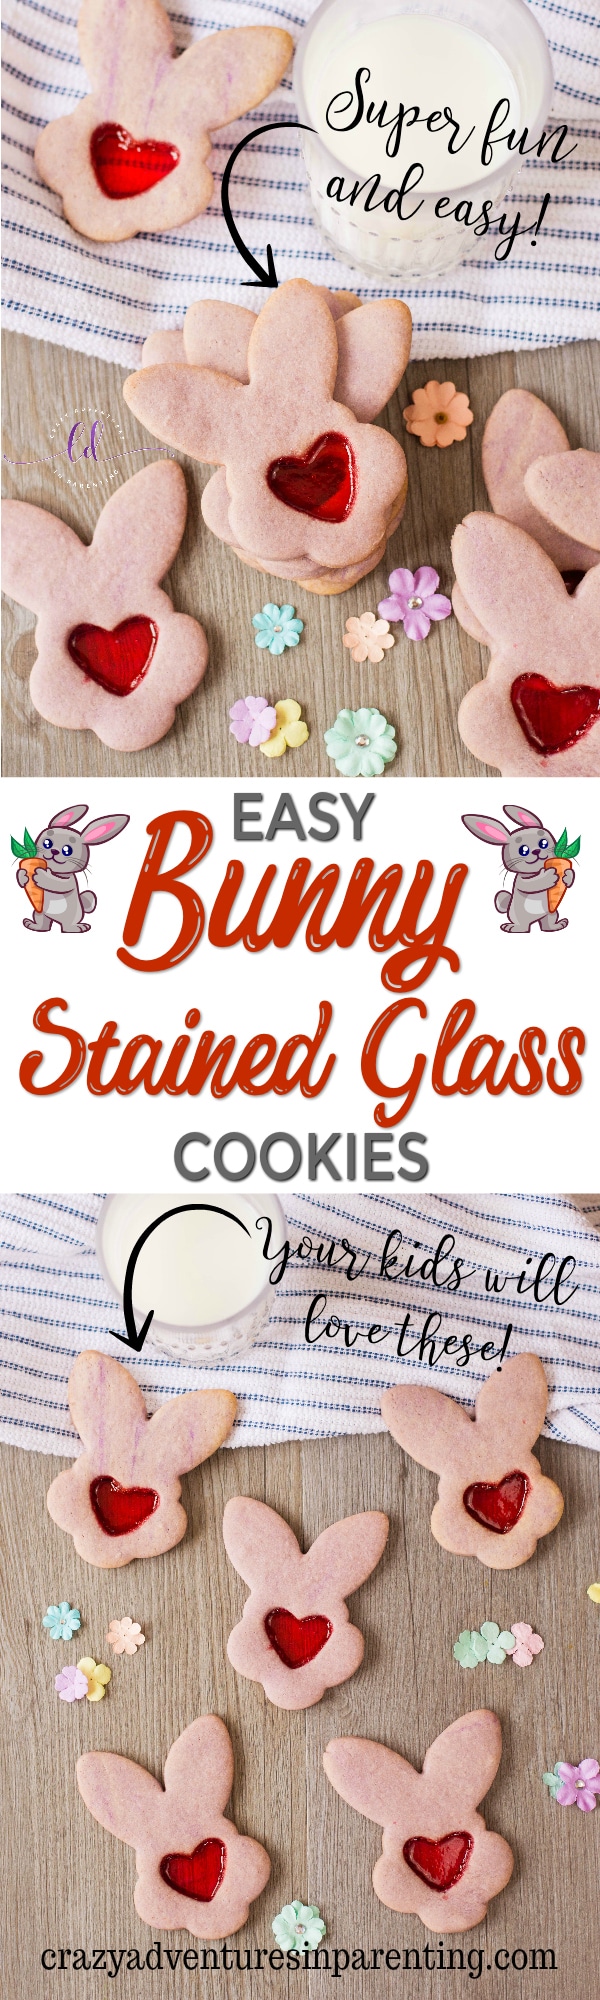 Easy Bunny Stained Glass Cookies